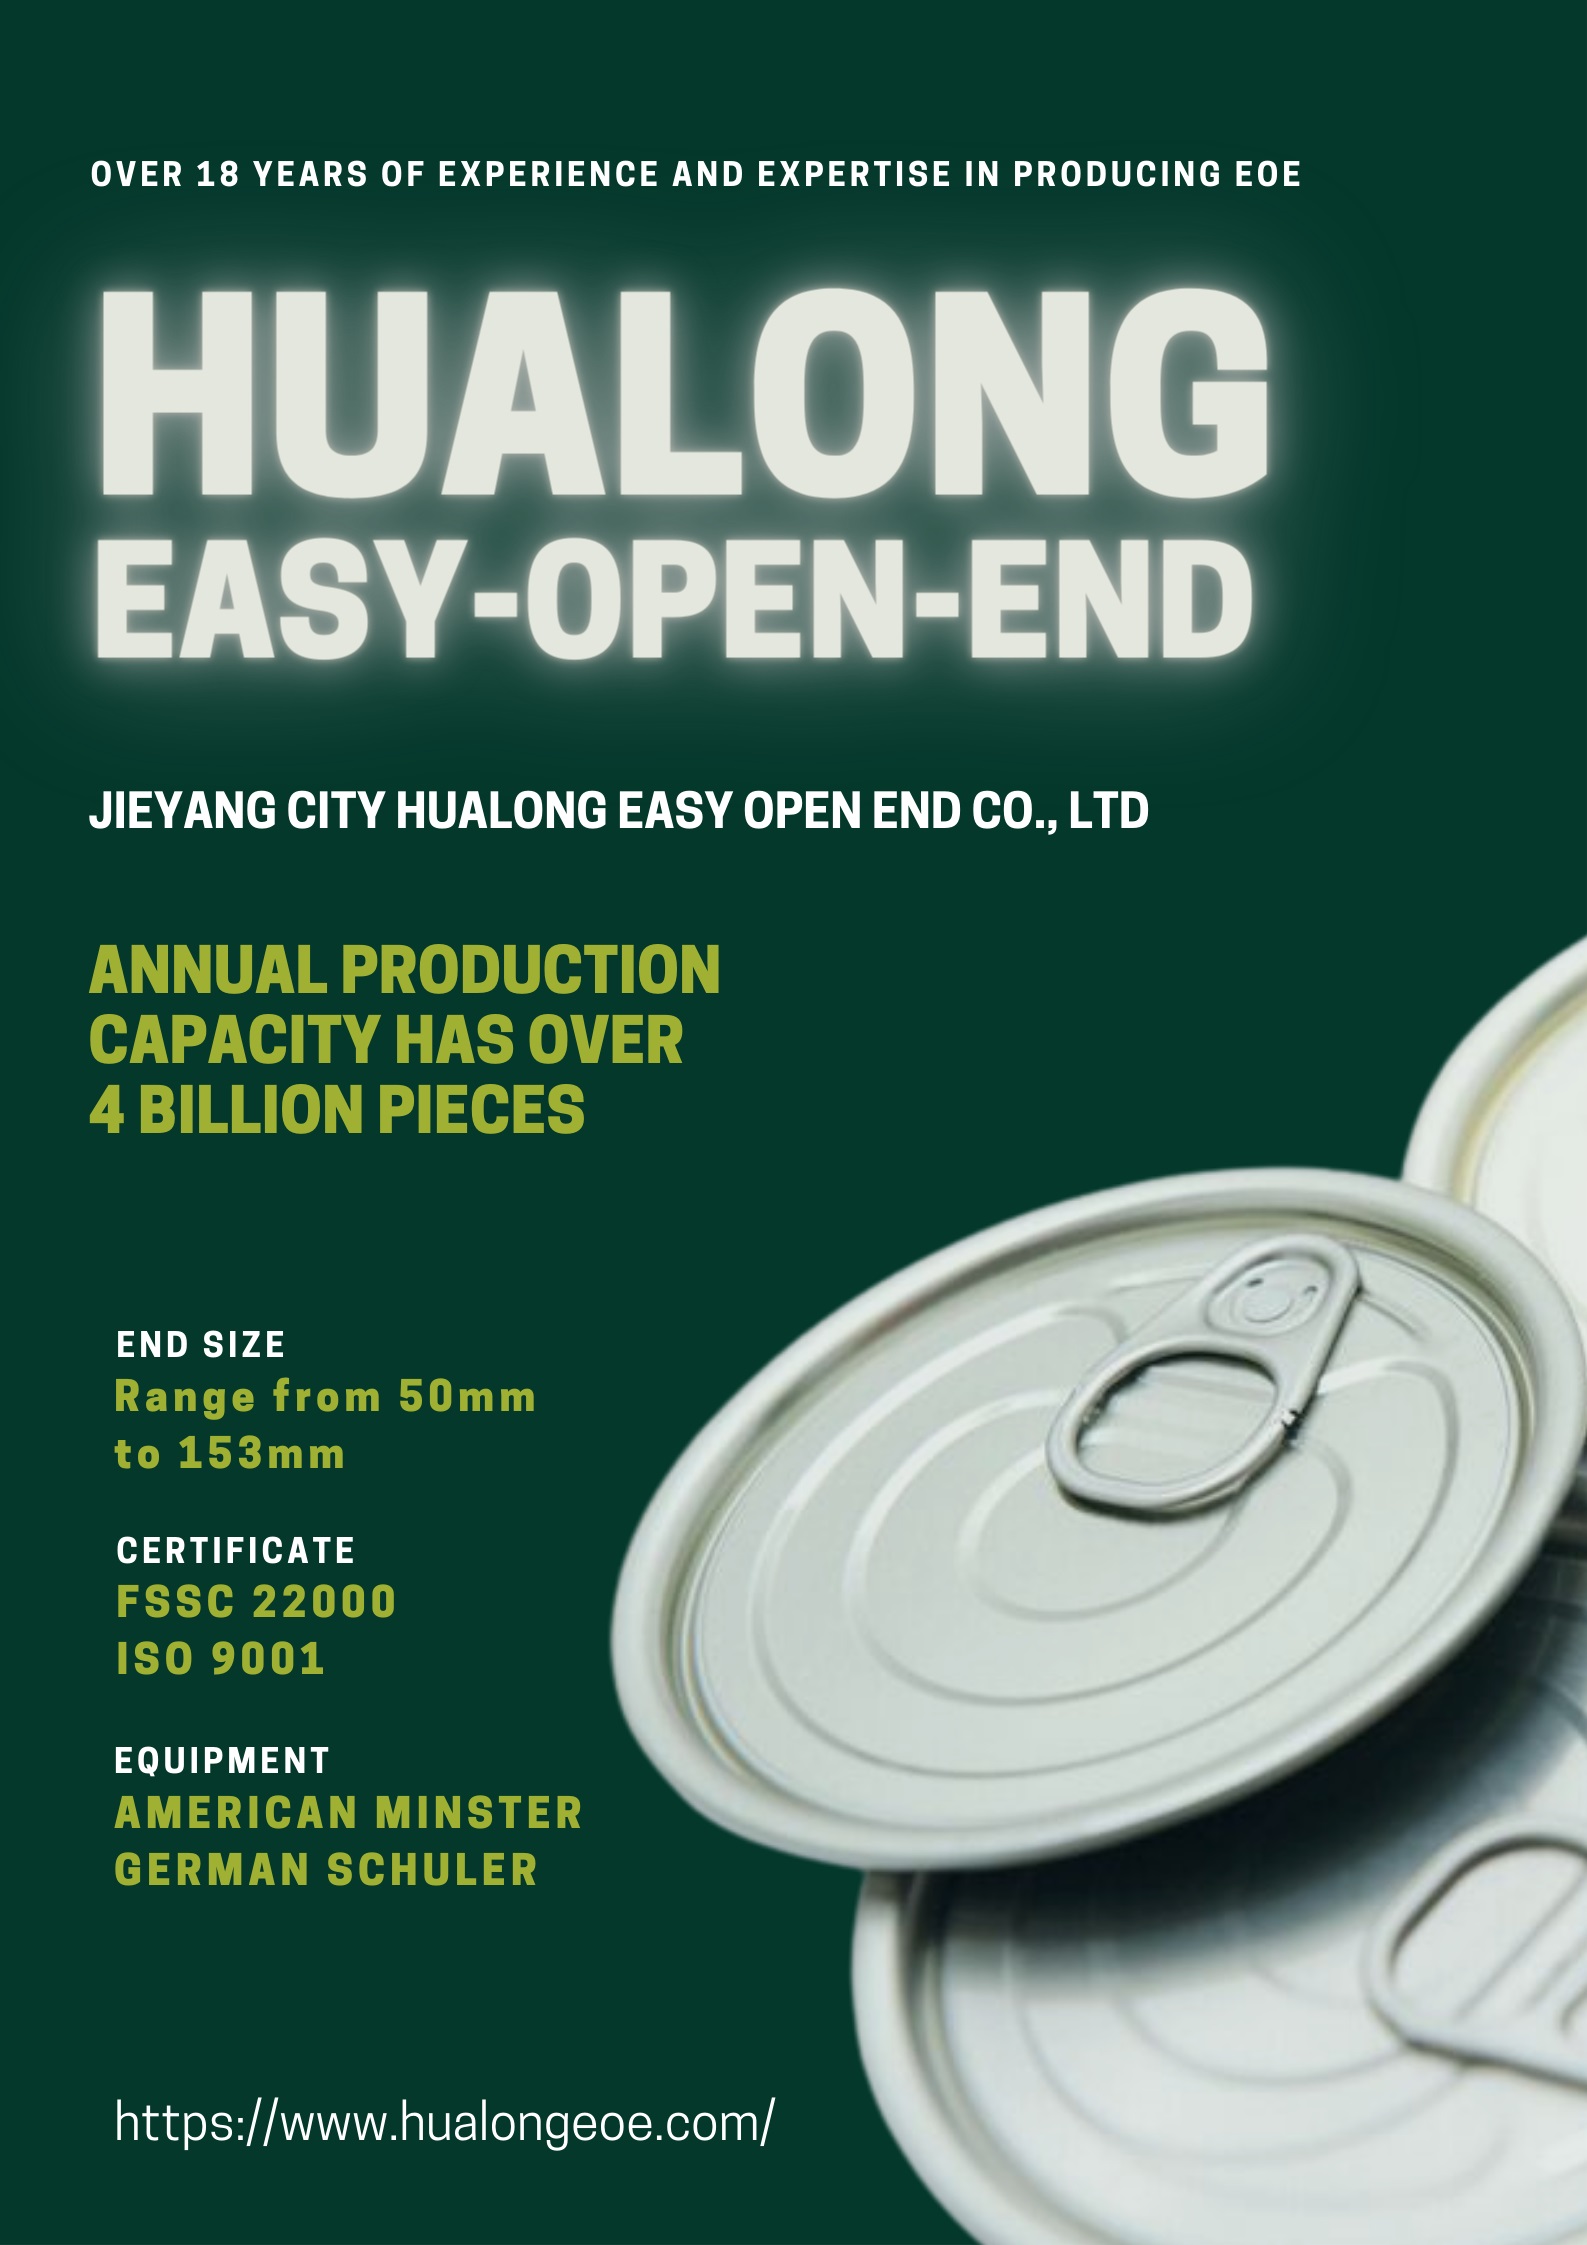 Hualong EOE Supplying More Easy Open Ends in the Can-Making Industry